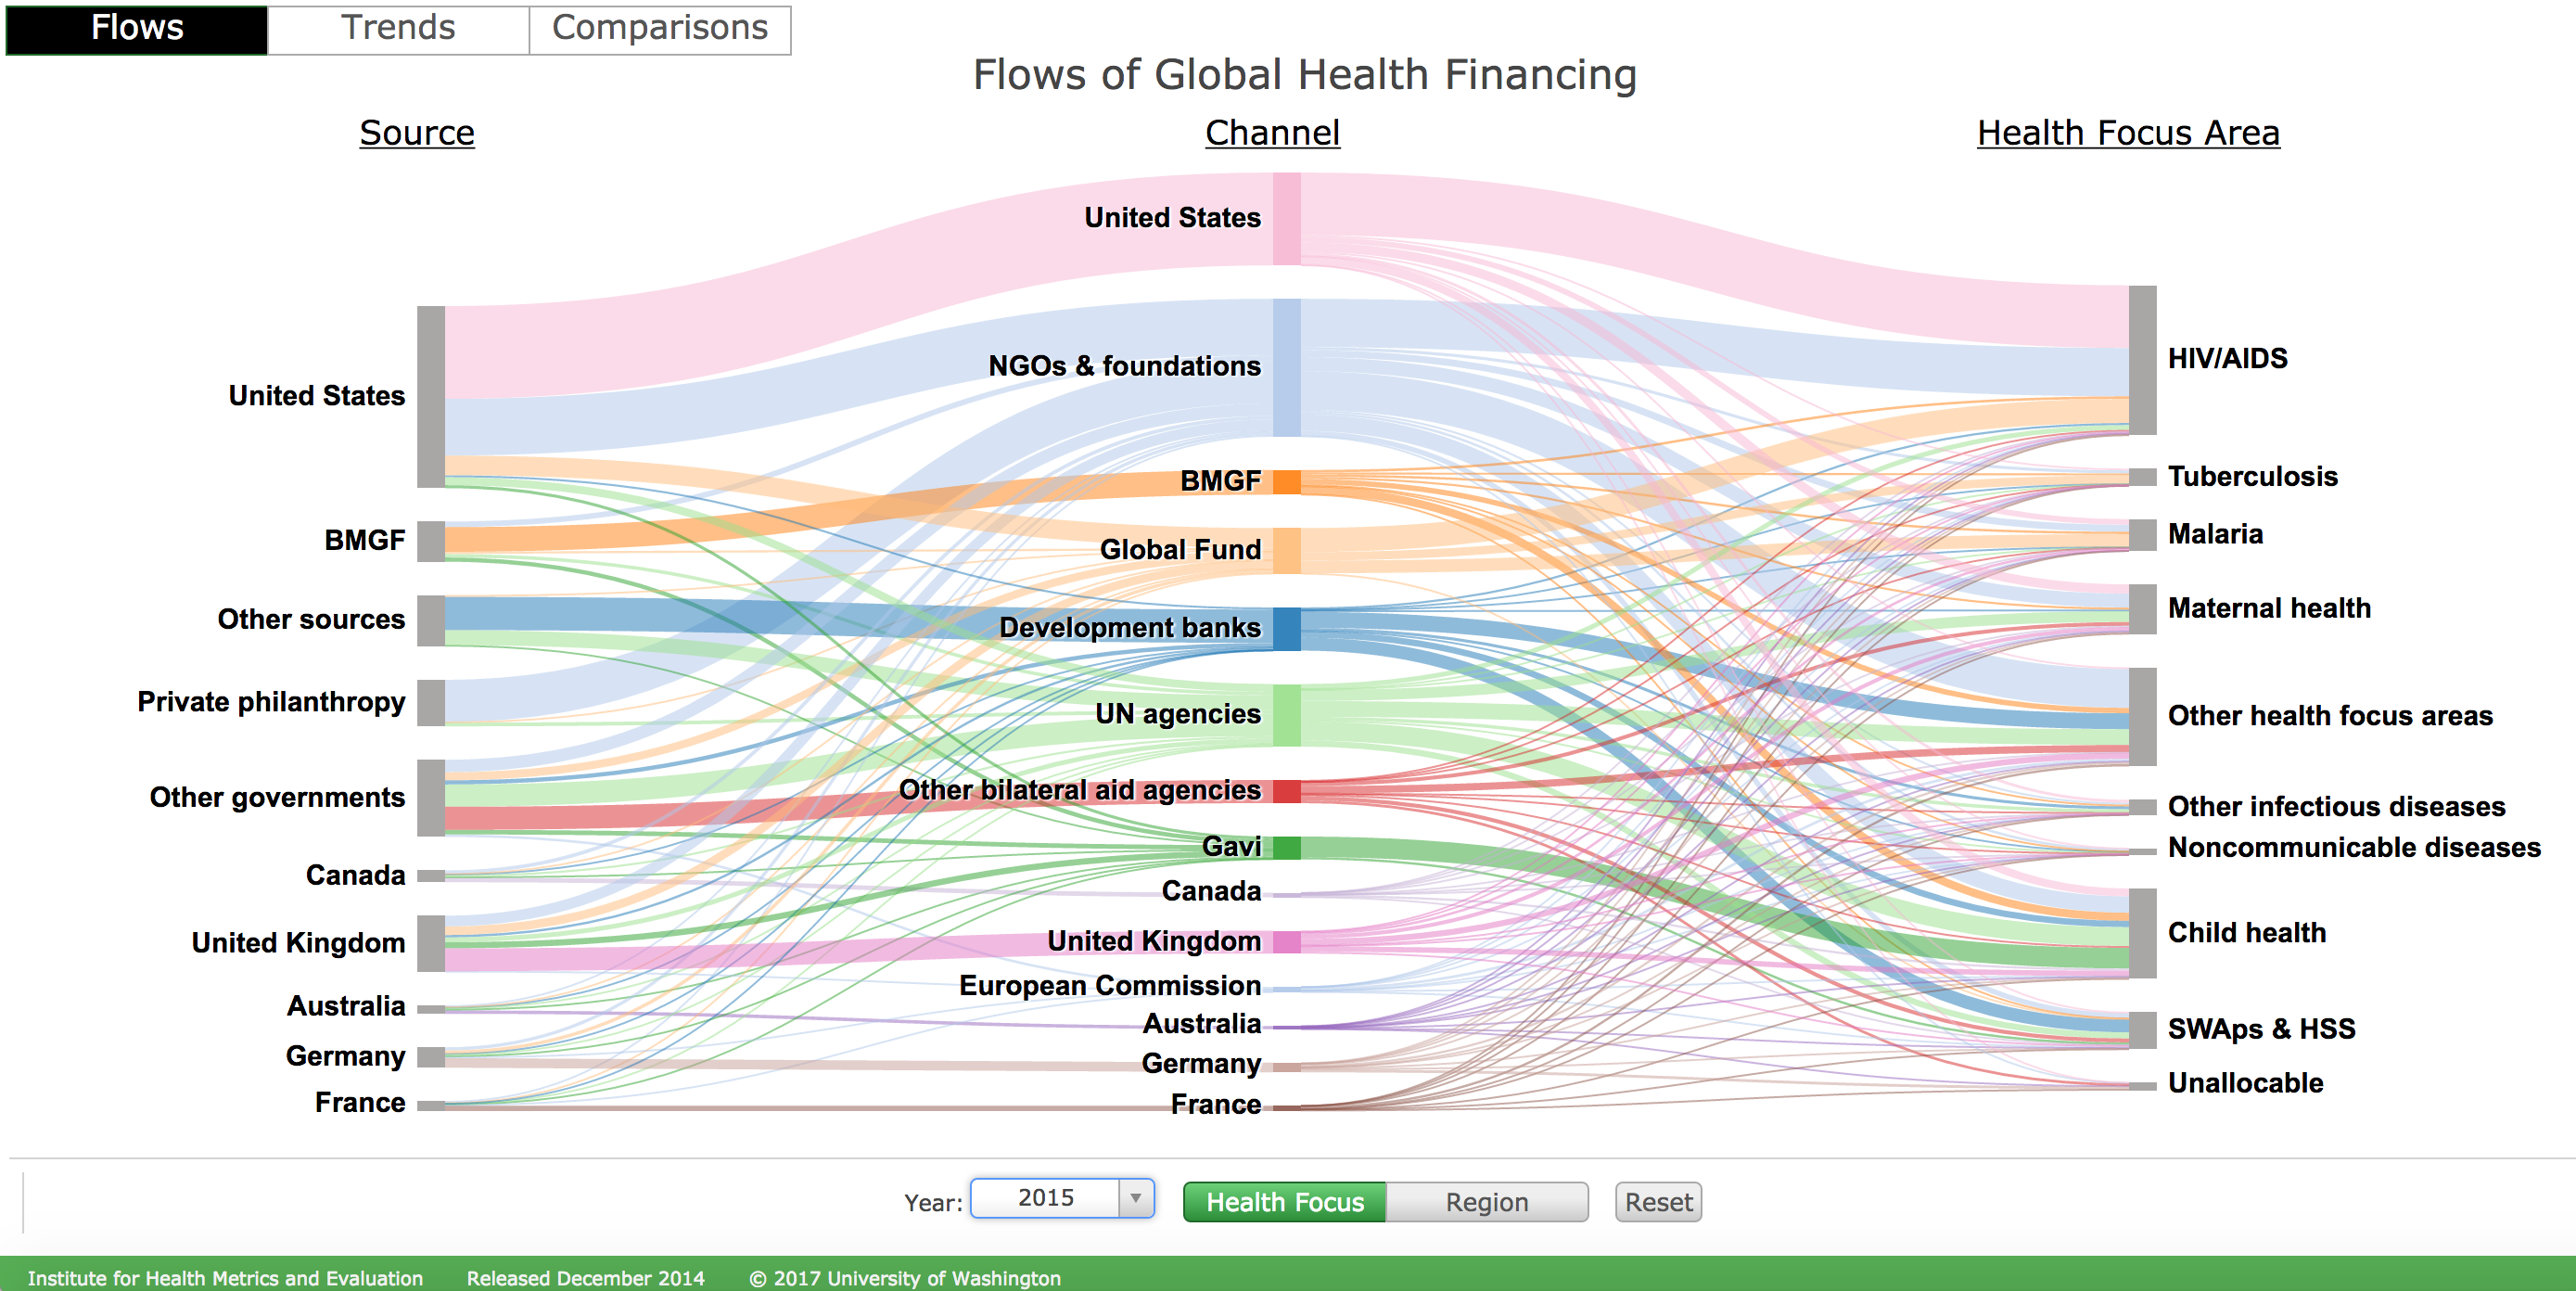 Flows of global health financing. Abbreviations: BMGF, Bill & Melinda Gates Foundation; SWAps & HSS, sector-wide approaches and health-sector support; Gavi, the Vaccine Alliance. Source: Institute for Health Metrics and Evaluation, http://vizhub.healthdata.org/fgh/